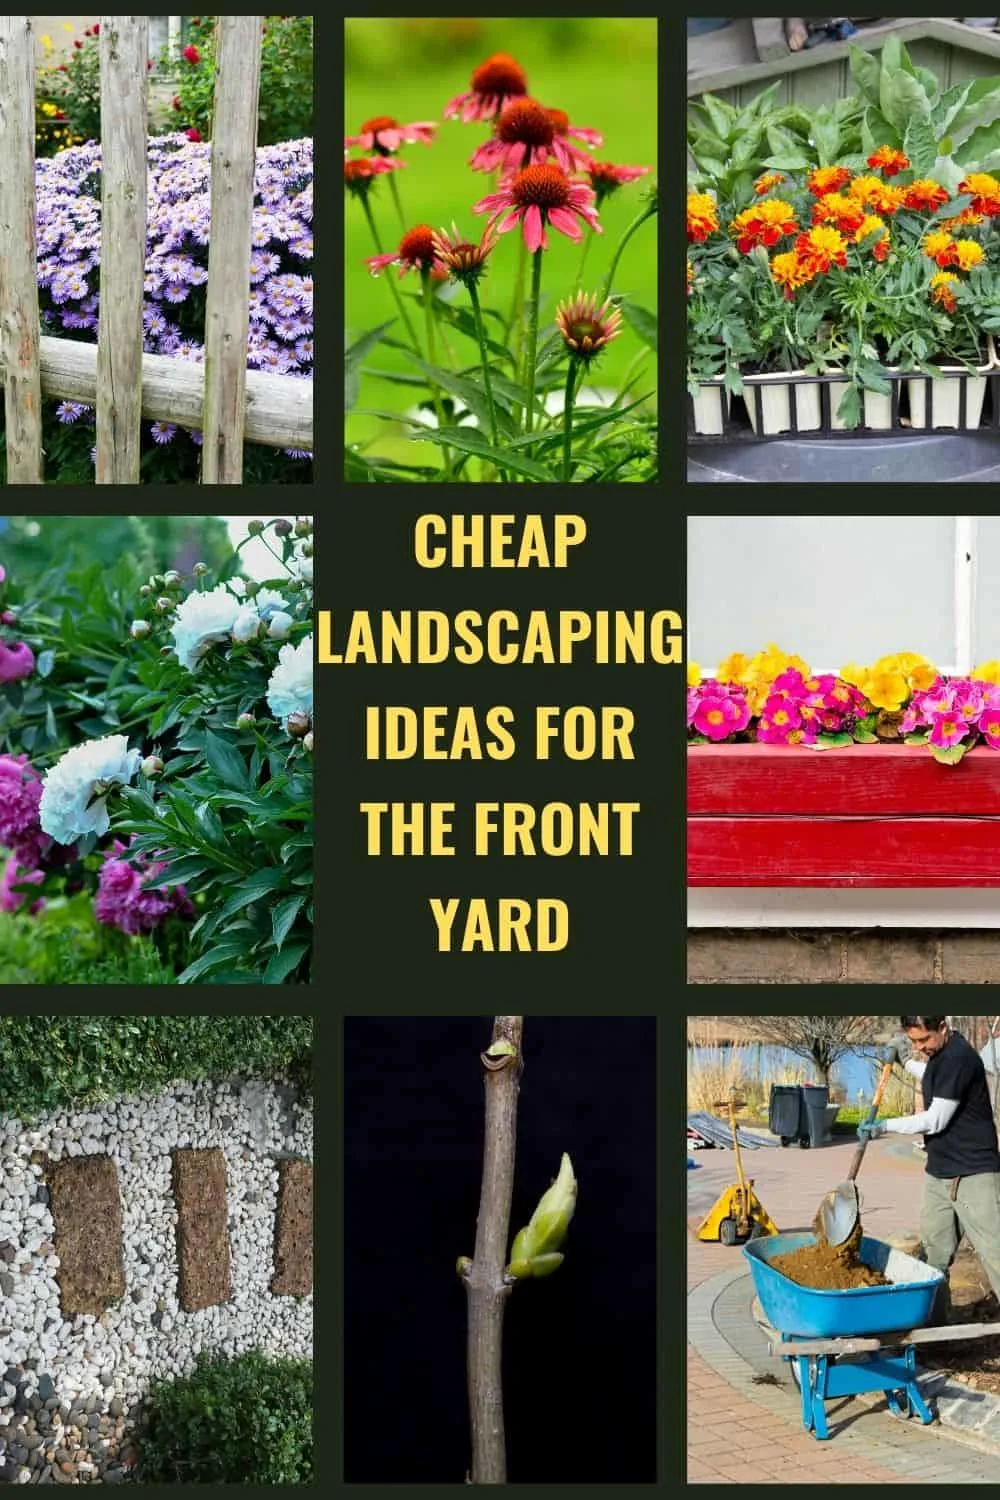 Cheap Landscaping Ideas for The Front Yard